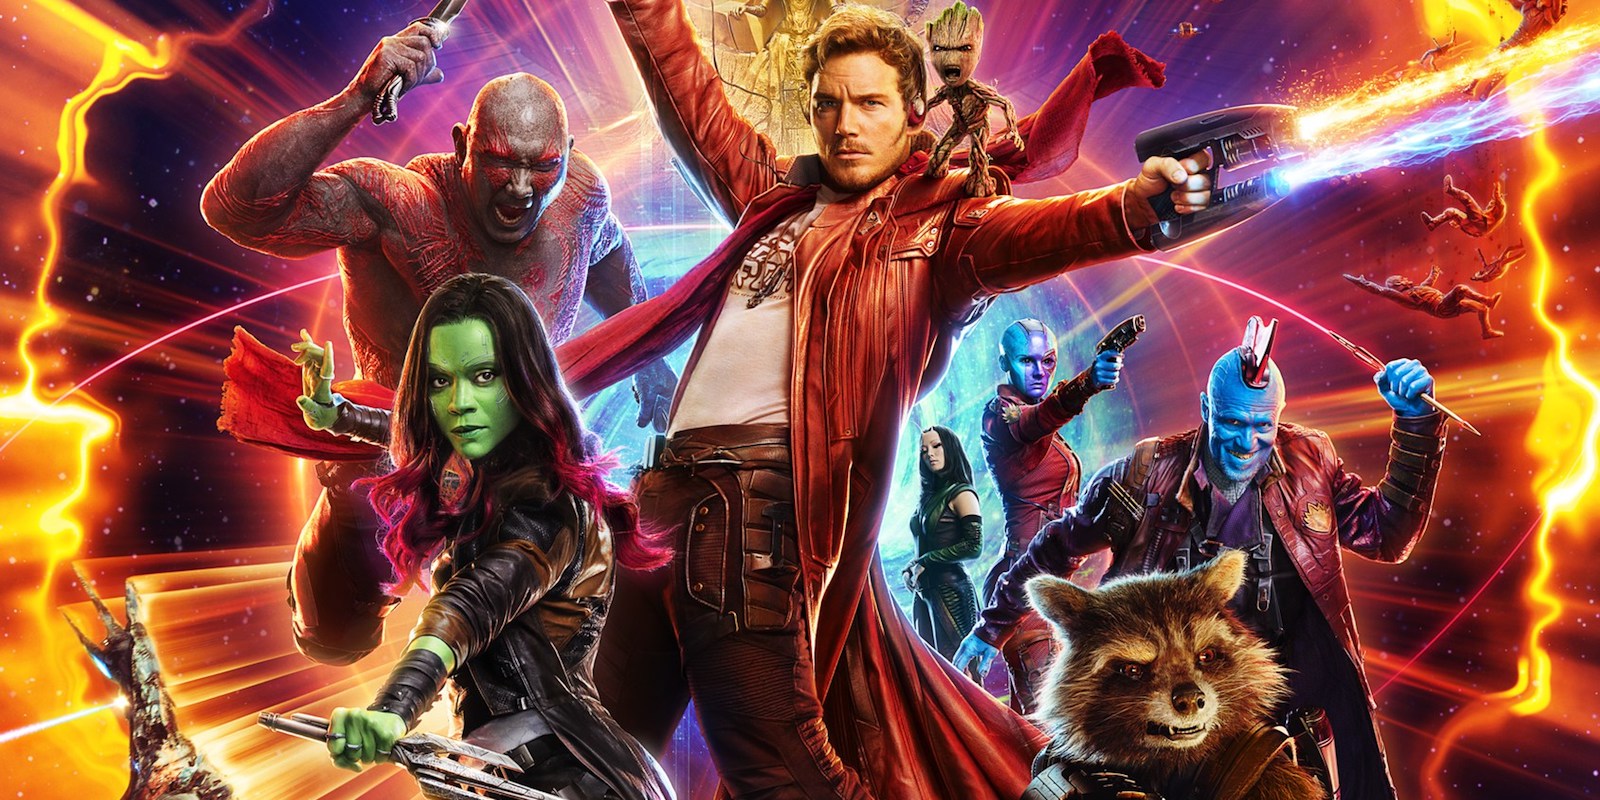 Michael Rooker reveals what 'Guardians of the Galaxy Vol. 2' scene puts him to sleep